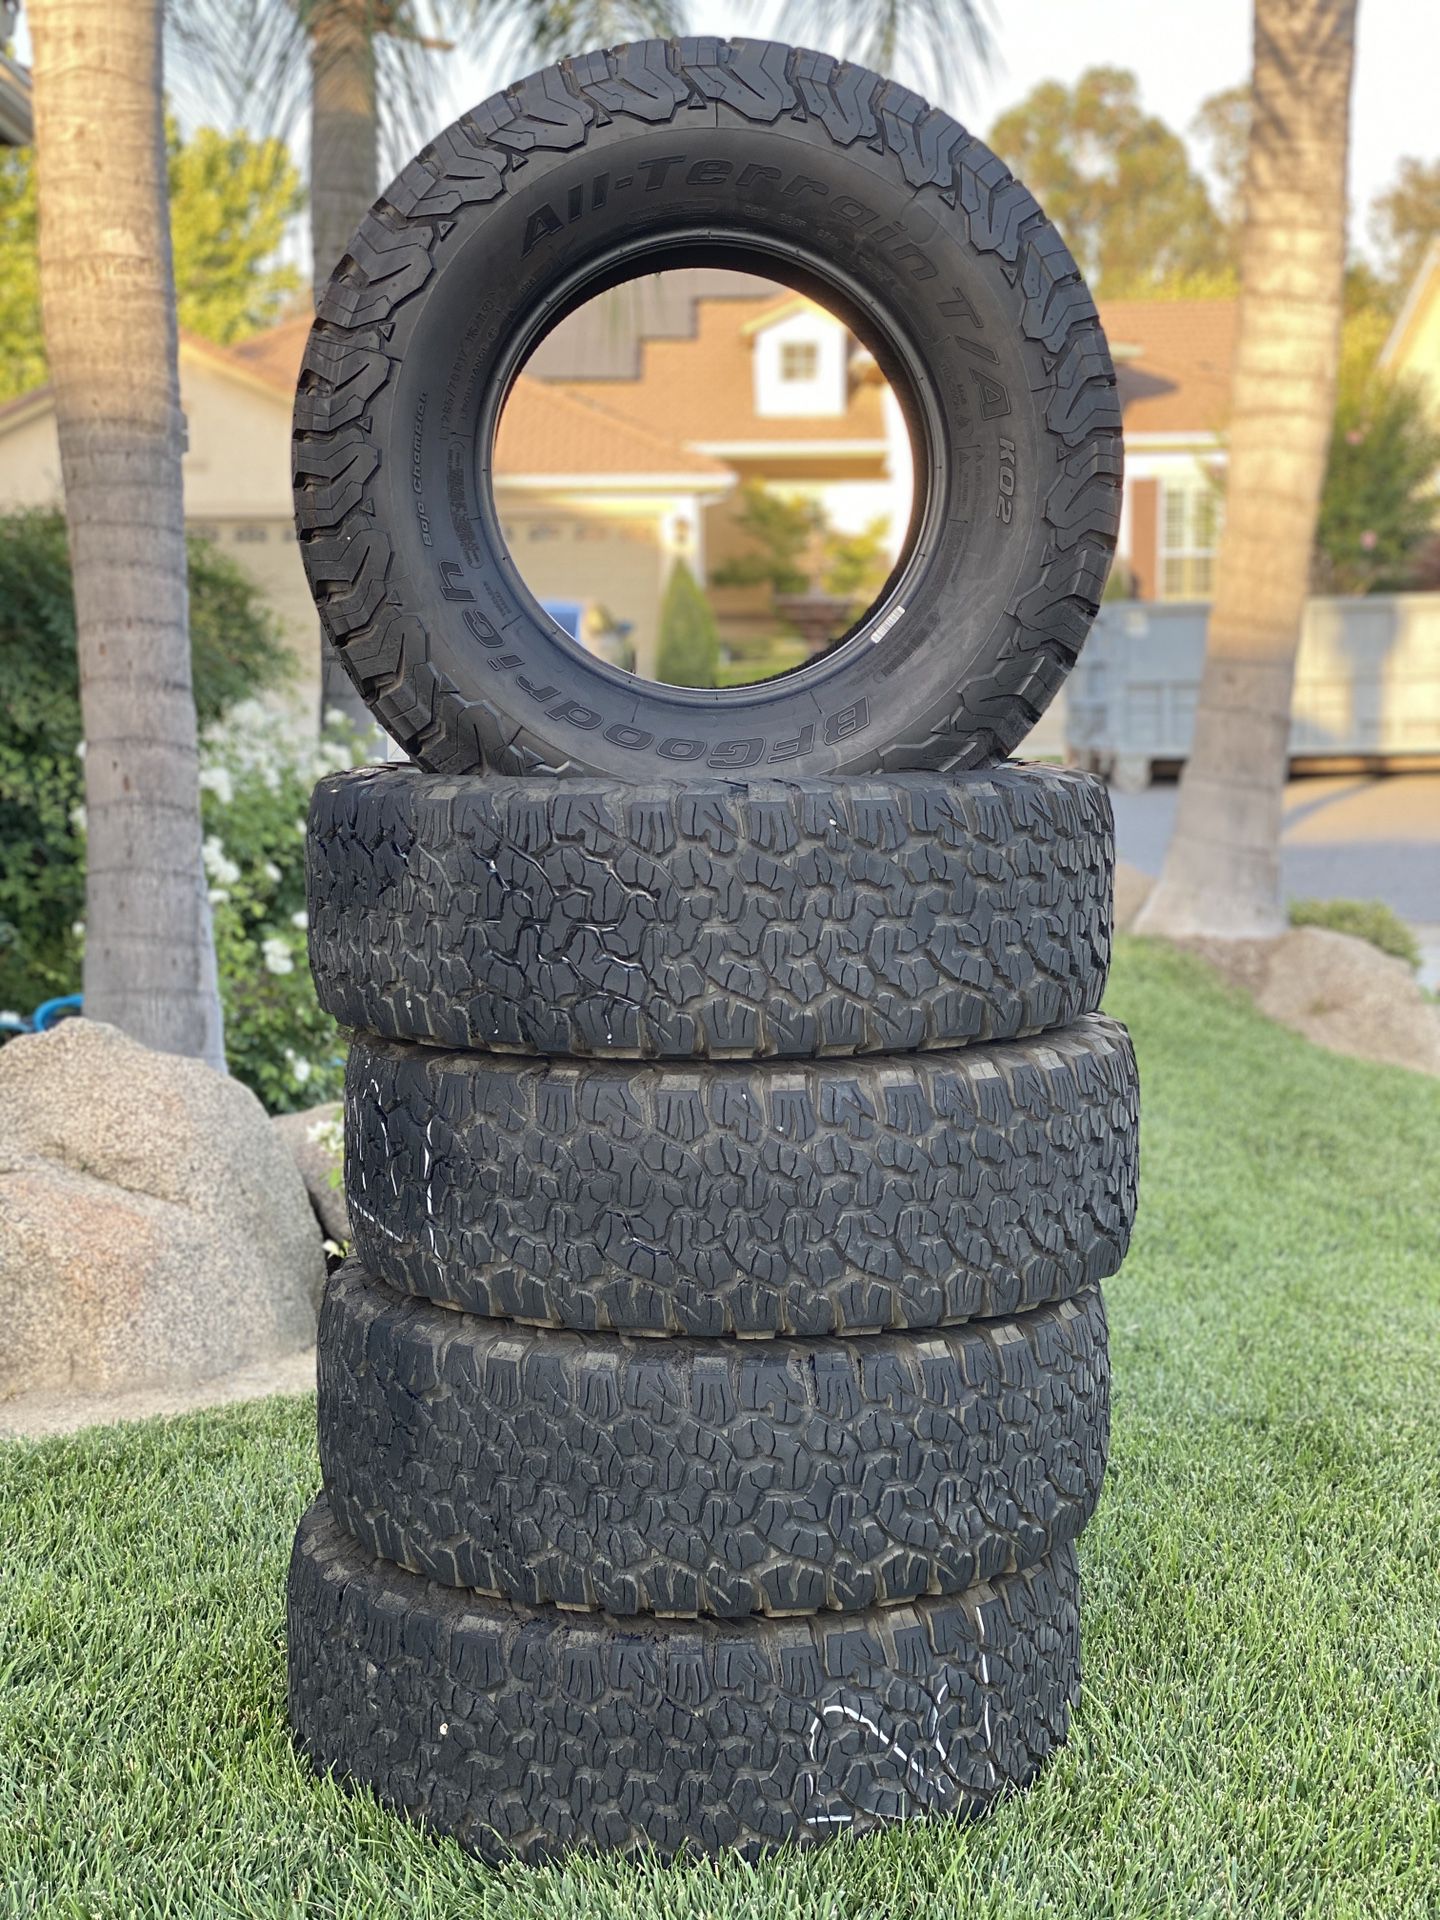 33in tires